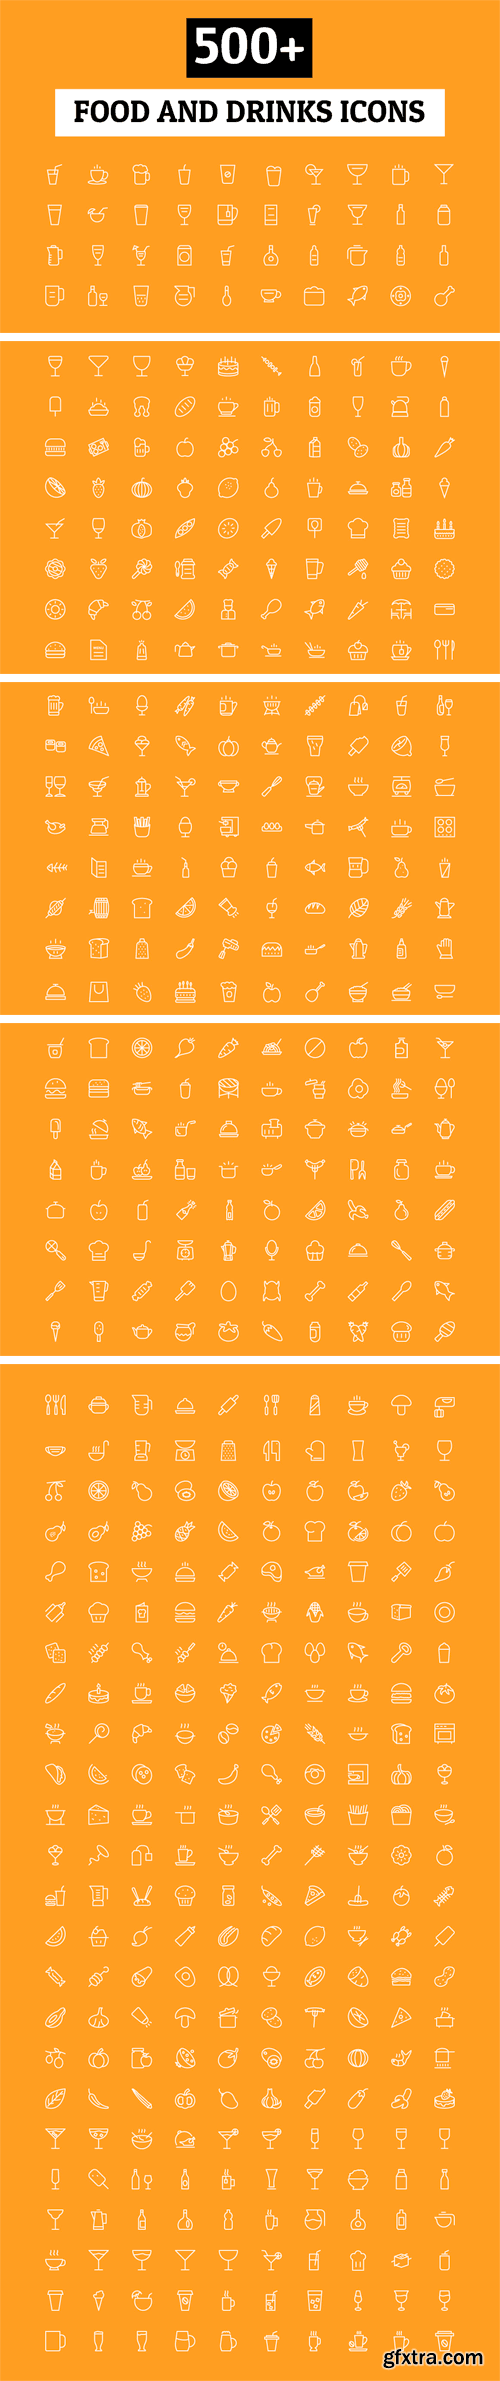 CM 243055 - 500+ Food and Drinks Icons